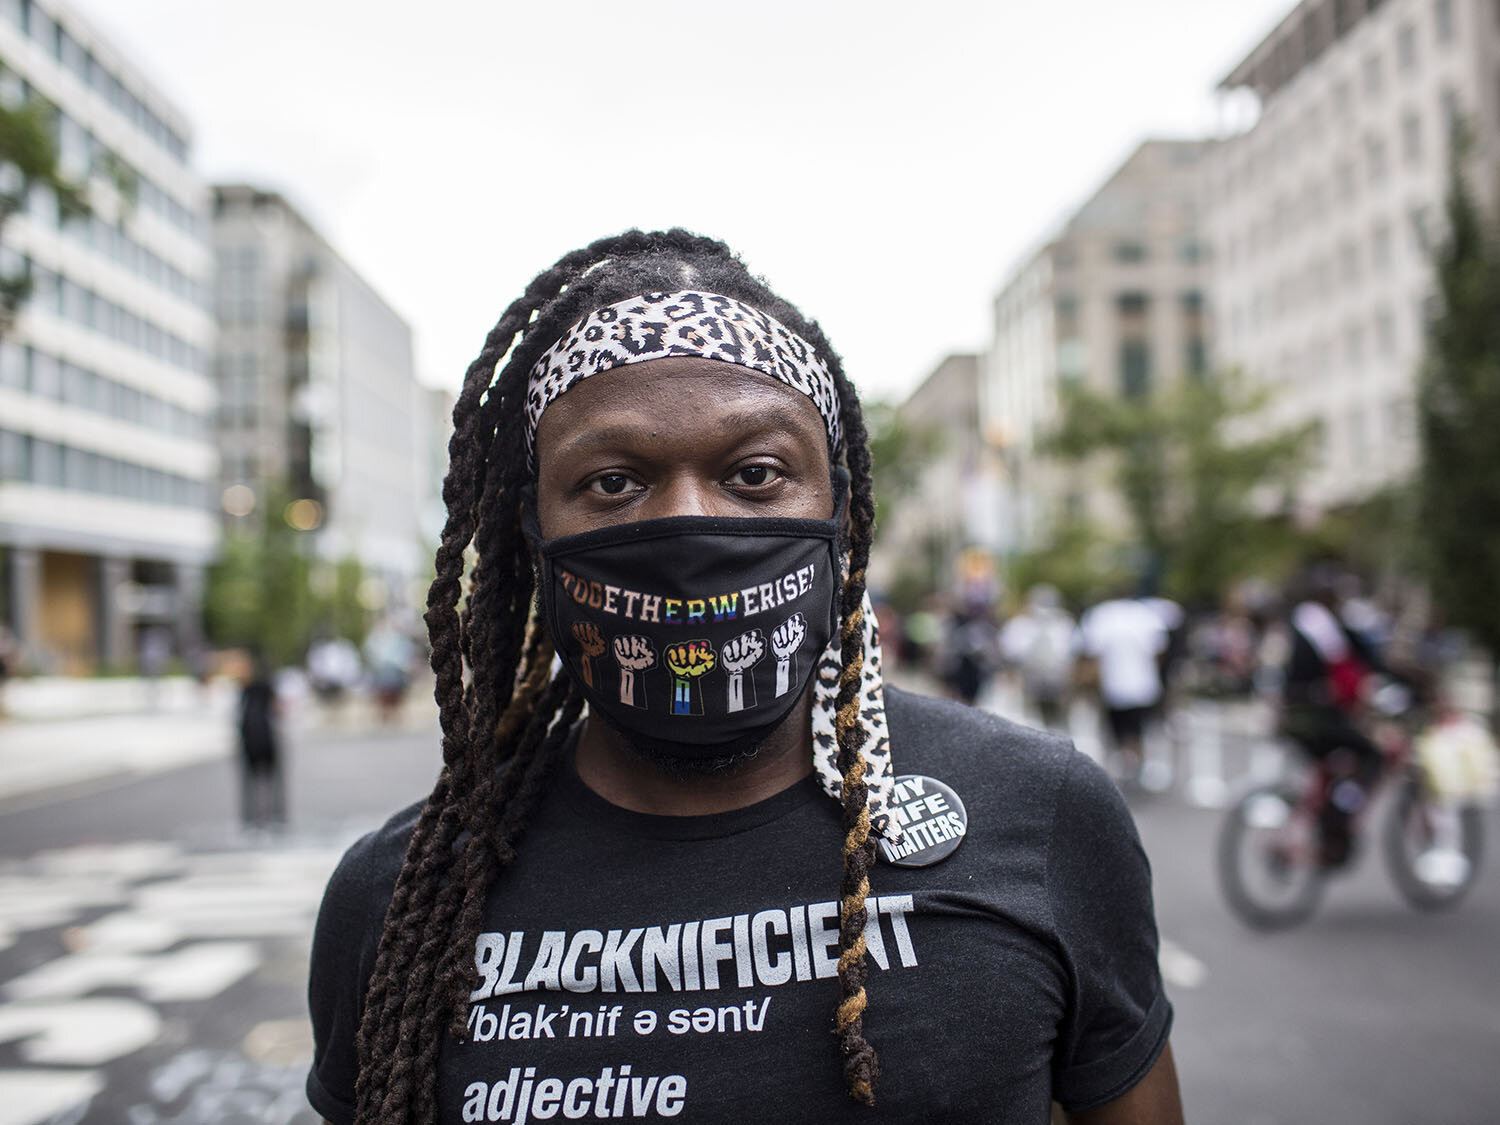  Name:  JeanMichael Prindilus   Age: 38  Date and Place the photo was taken: August 28, 2020, Black Lives Matter Plaza, Washington DC   His statement:  "My shirt describes me; I am Blacknificient, (adjective) one impressively dripping in black beauty